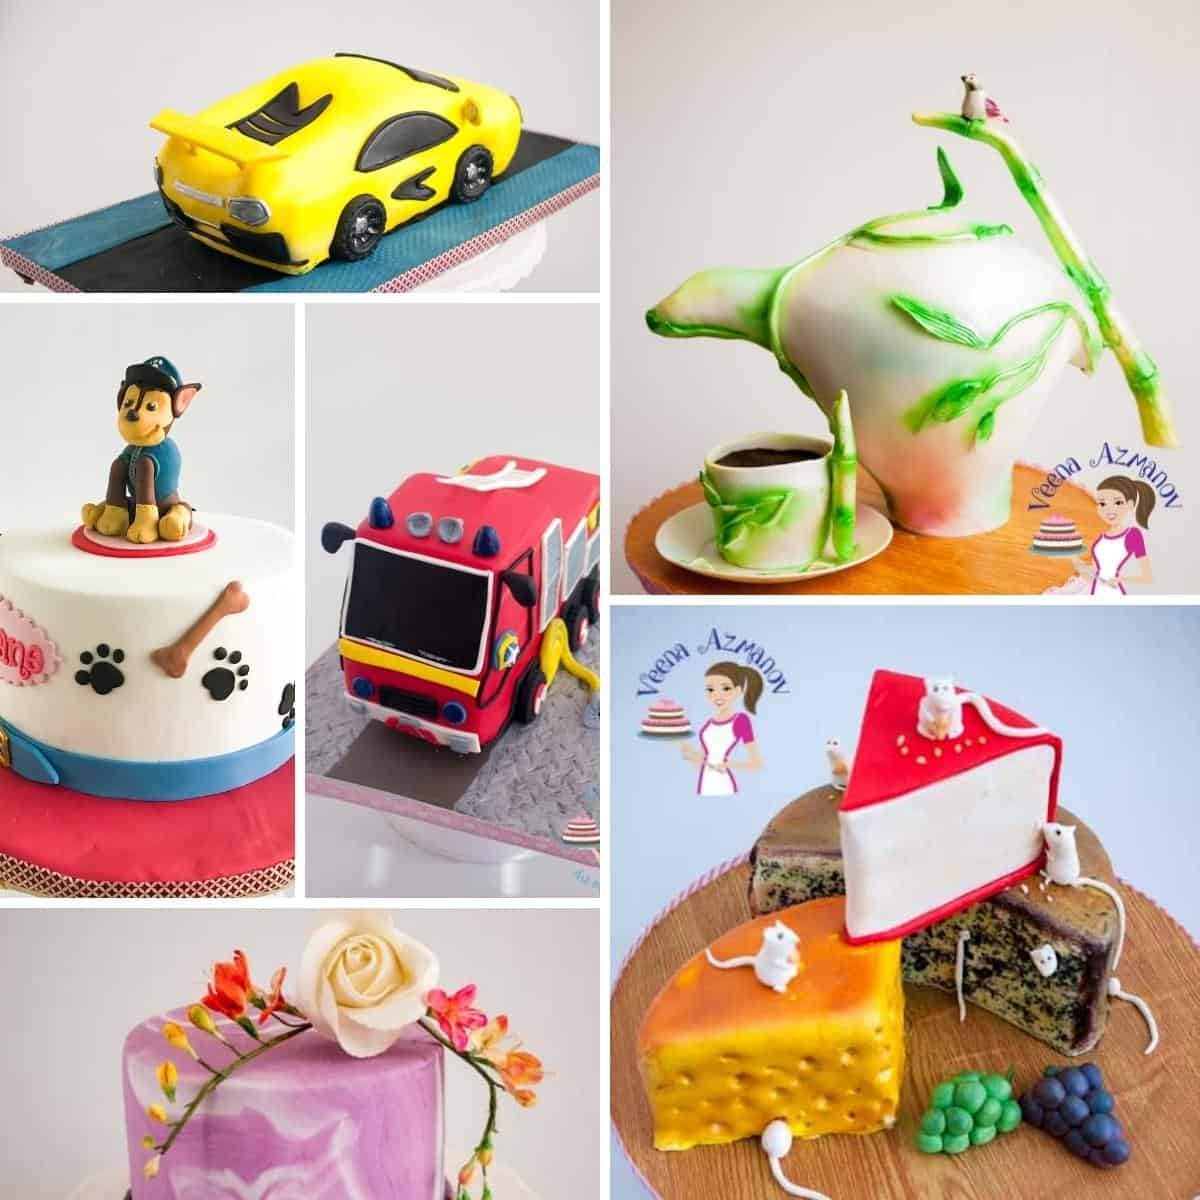 A collage with decorated cakes using modeling chocolate.